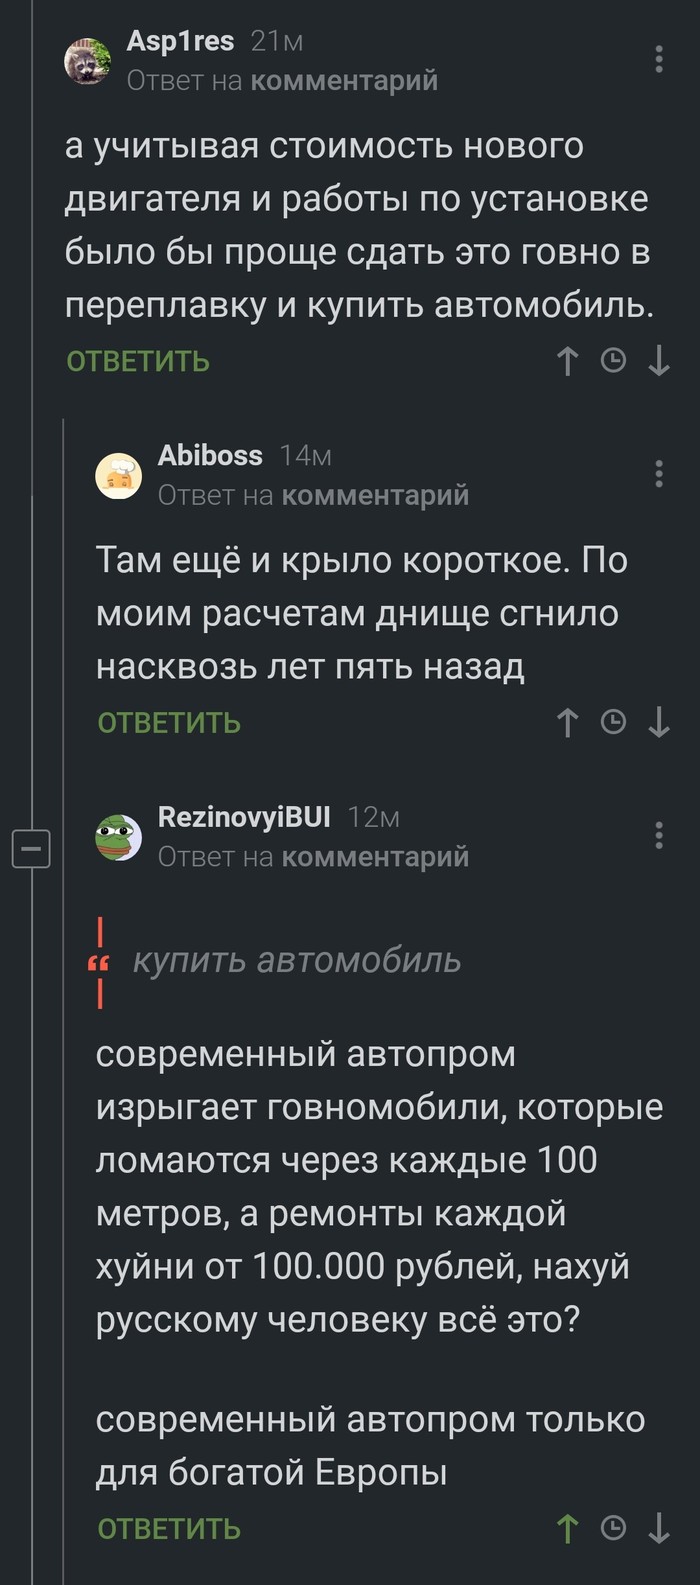 Russian car industry - Comments on Peekaboo, Lada, Longpost, Screenshot, Russian car industry, Domestic auto industry